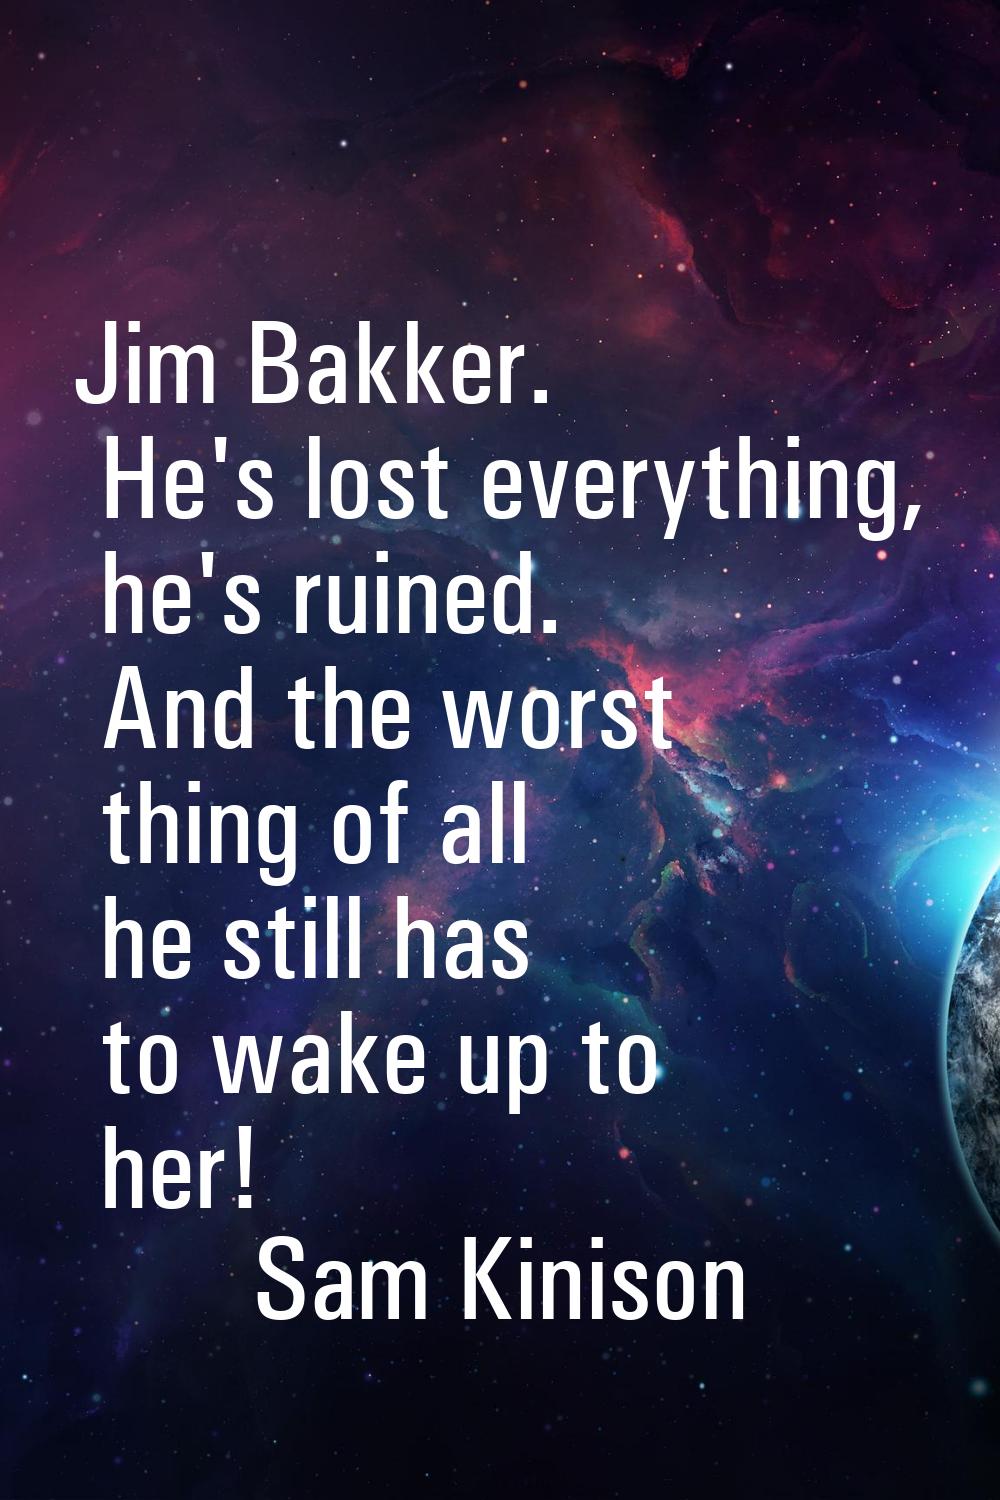 Jim Bakker. He's lost everything, he's ruined. And the worst thing of all he still has to wake up t